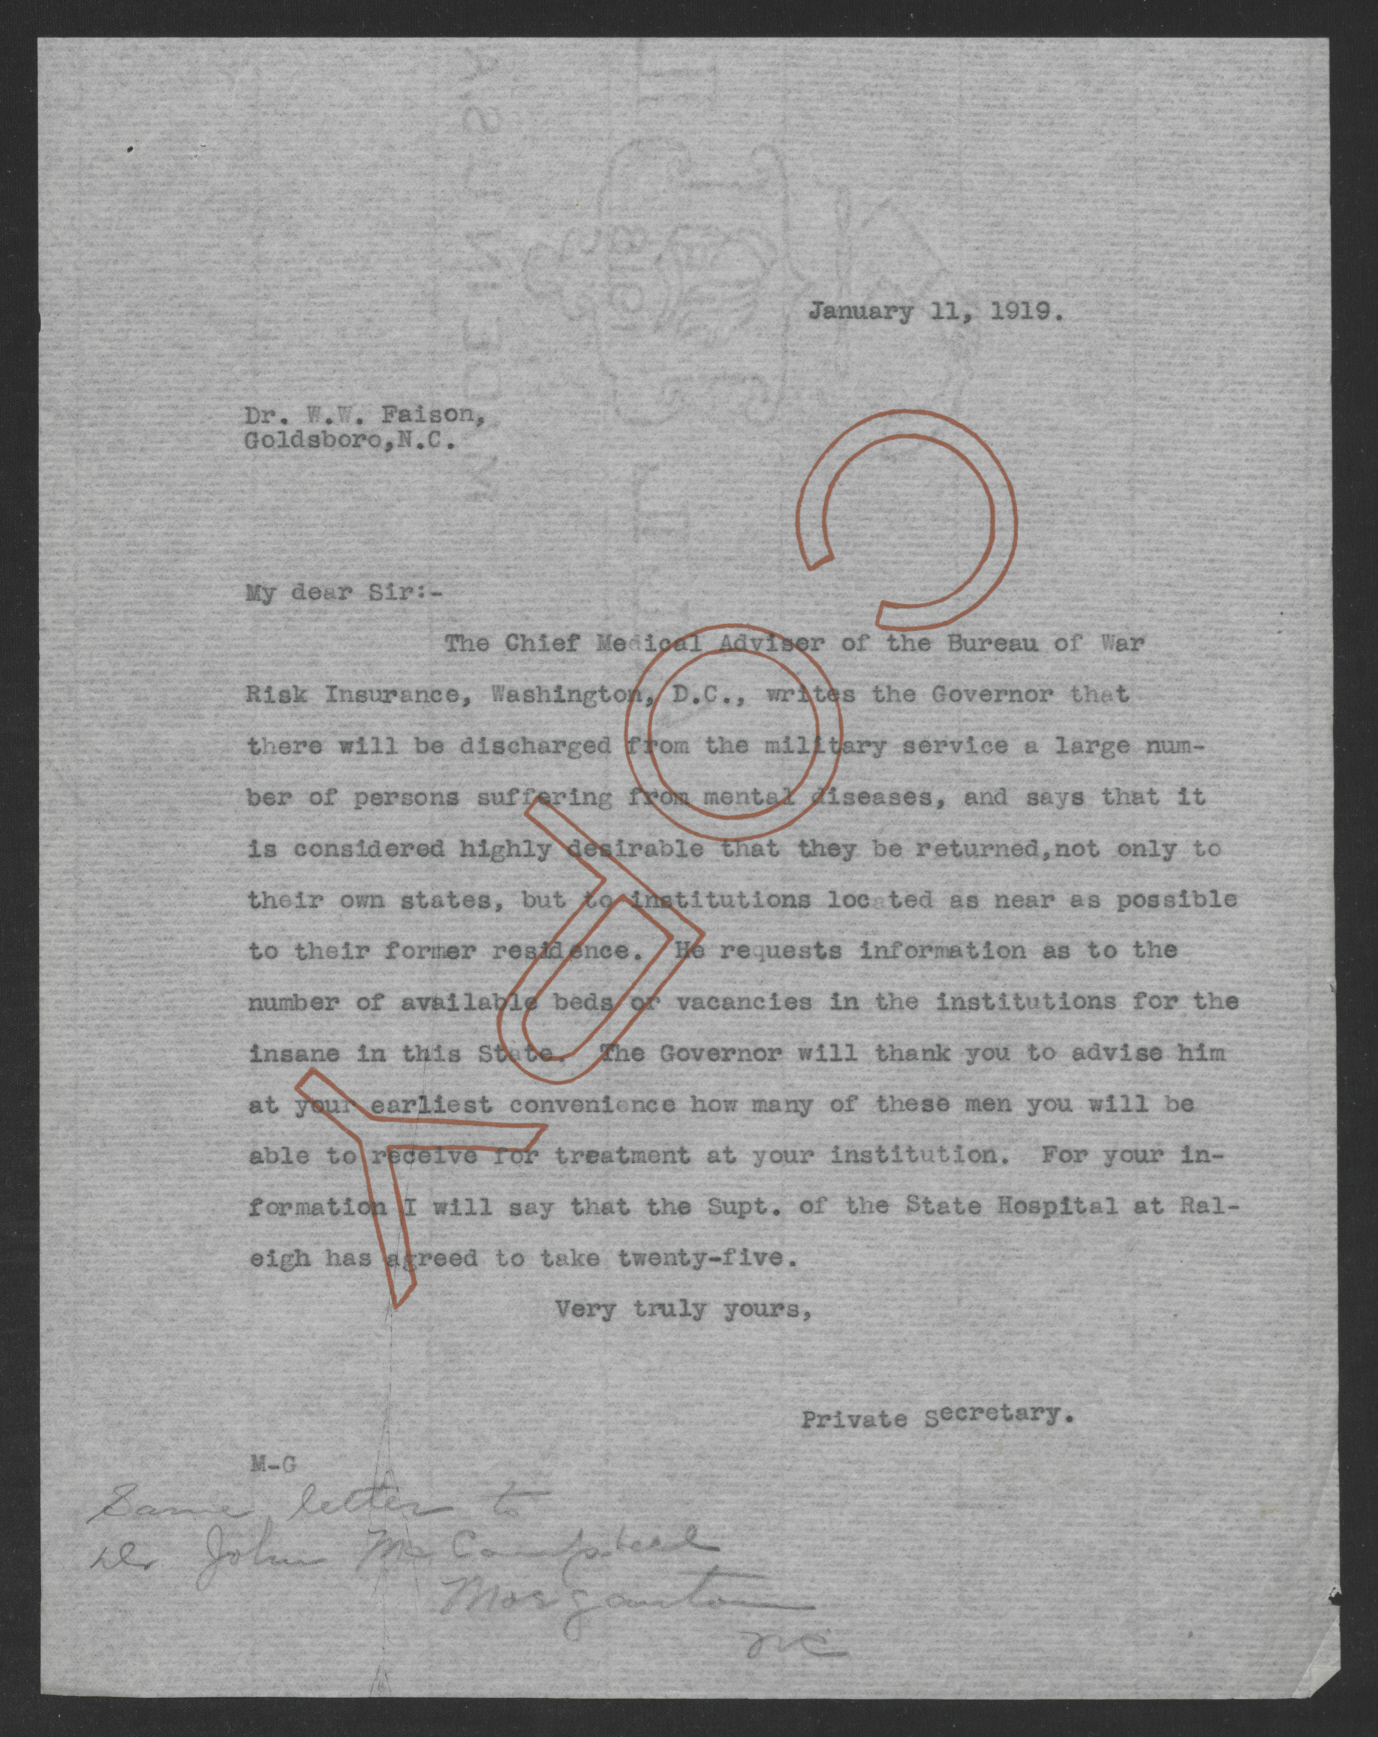 Letter from Santford Martin to William W. Faison, January 11, 1919